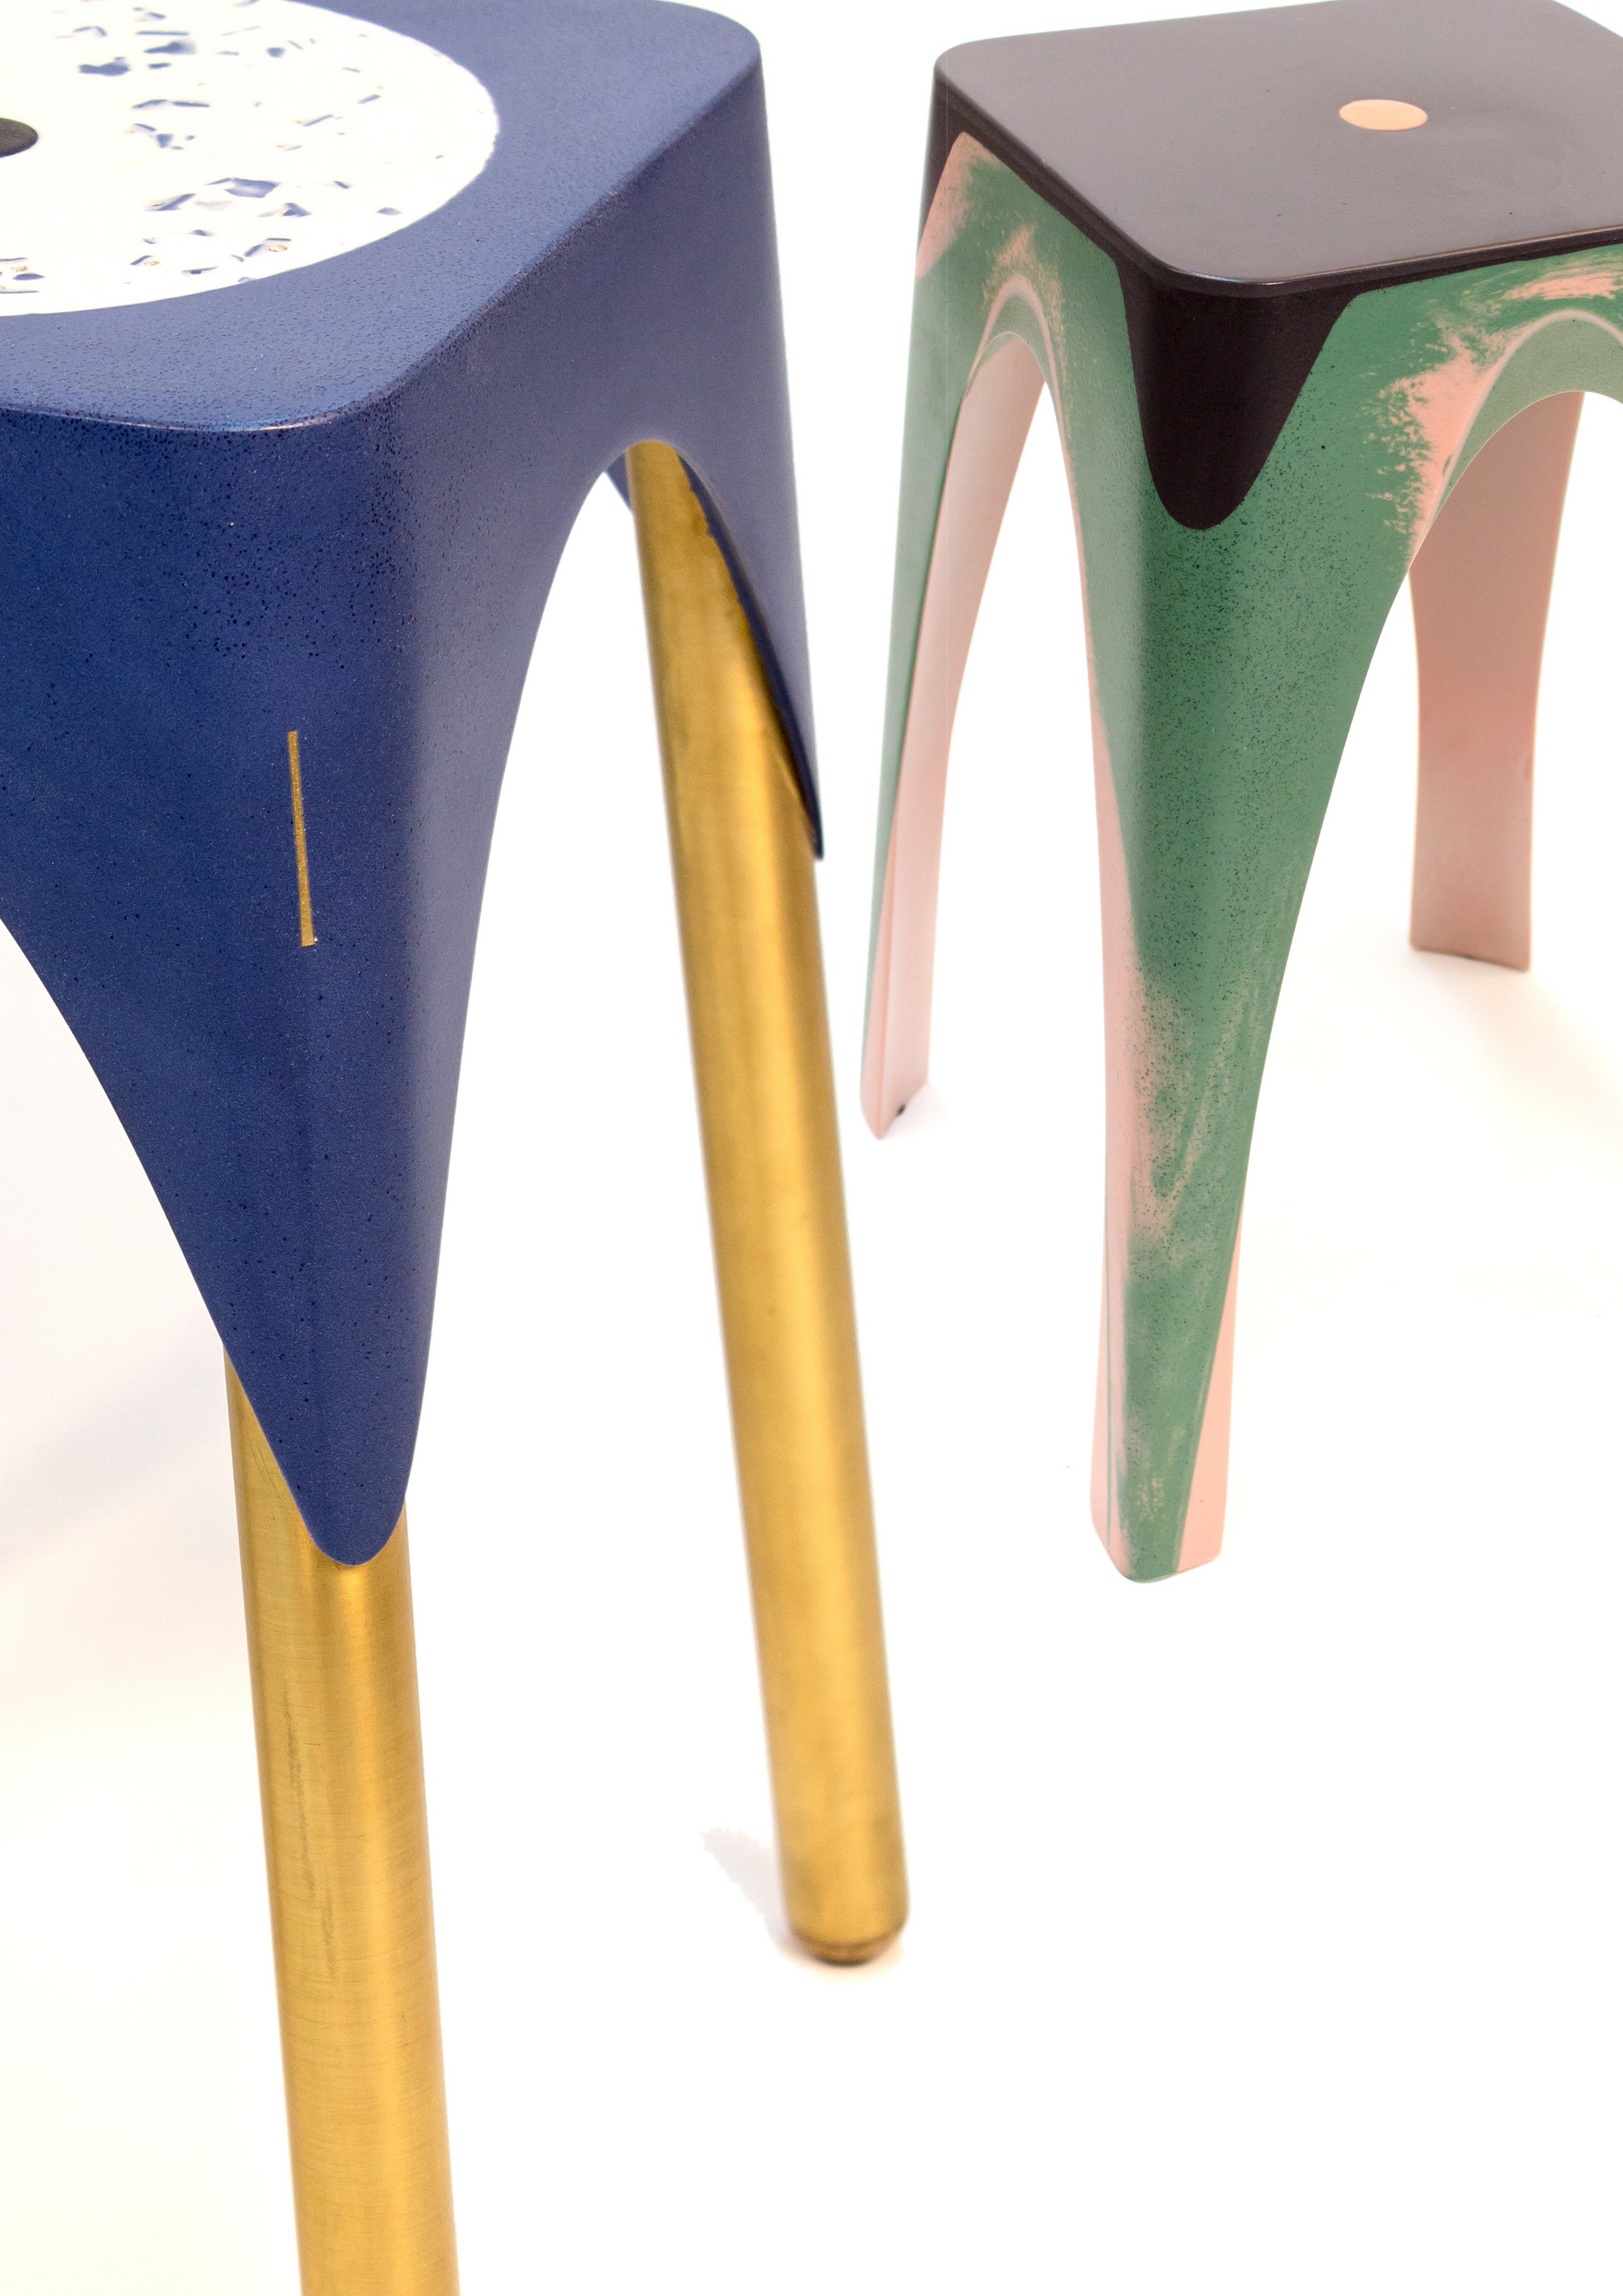 Matter of Motion Stools by Maor Aharon